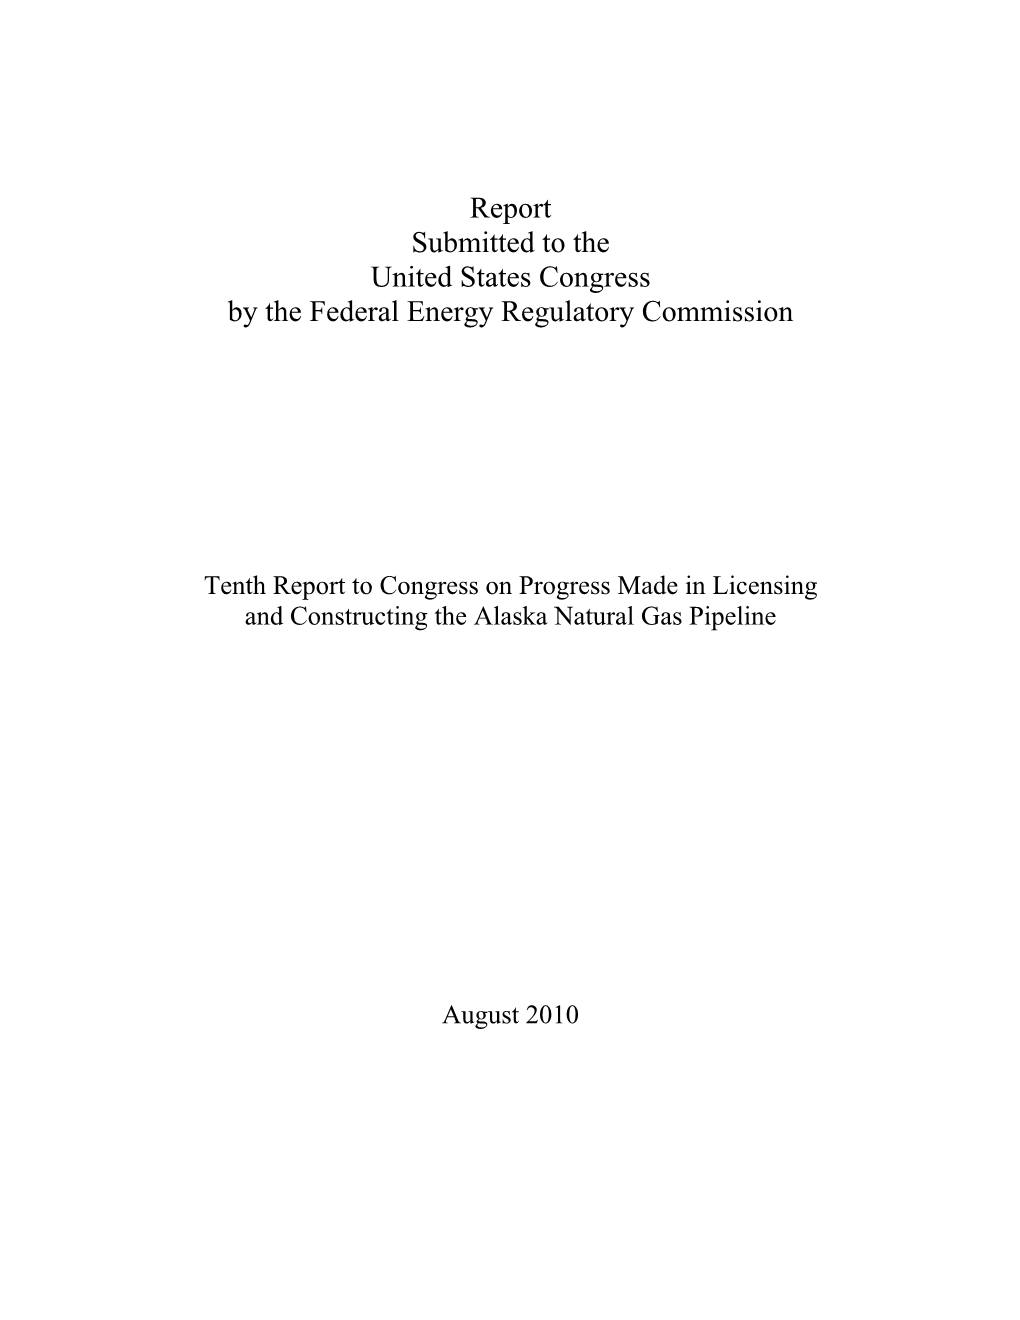 Tenth Report to Congress on Progress Made in Licensing and Constructing the Alaska Natural Gas Pipeline